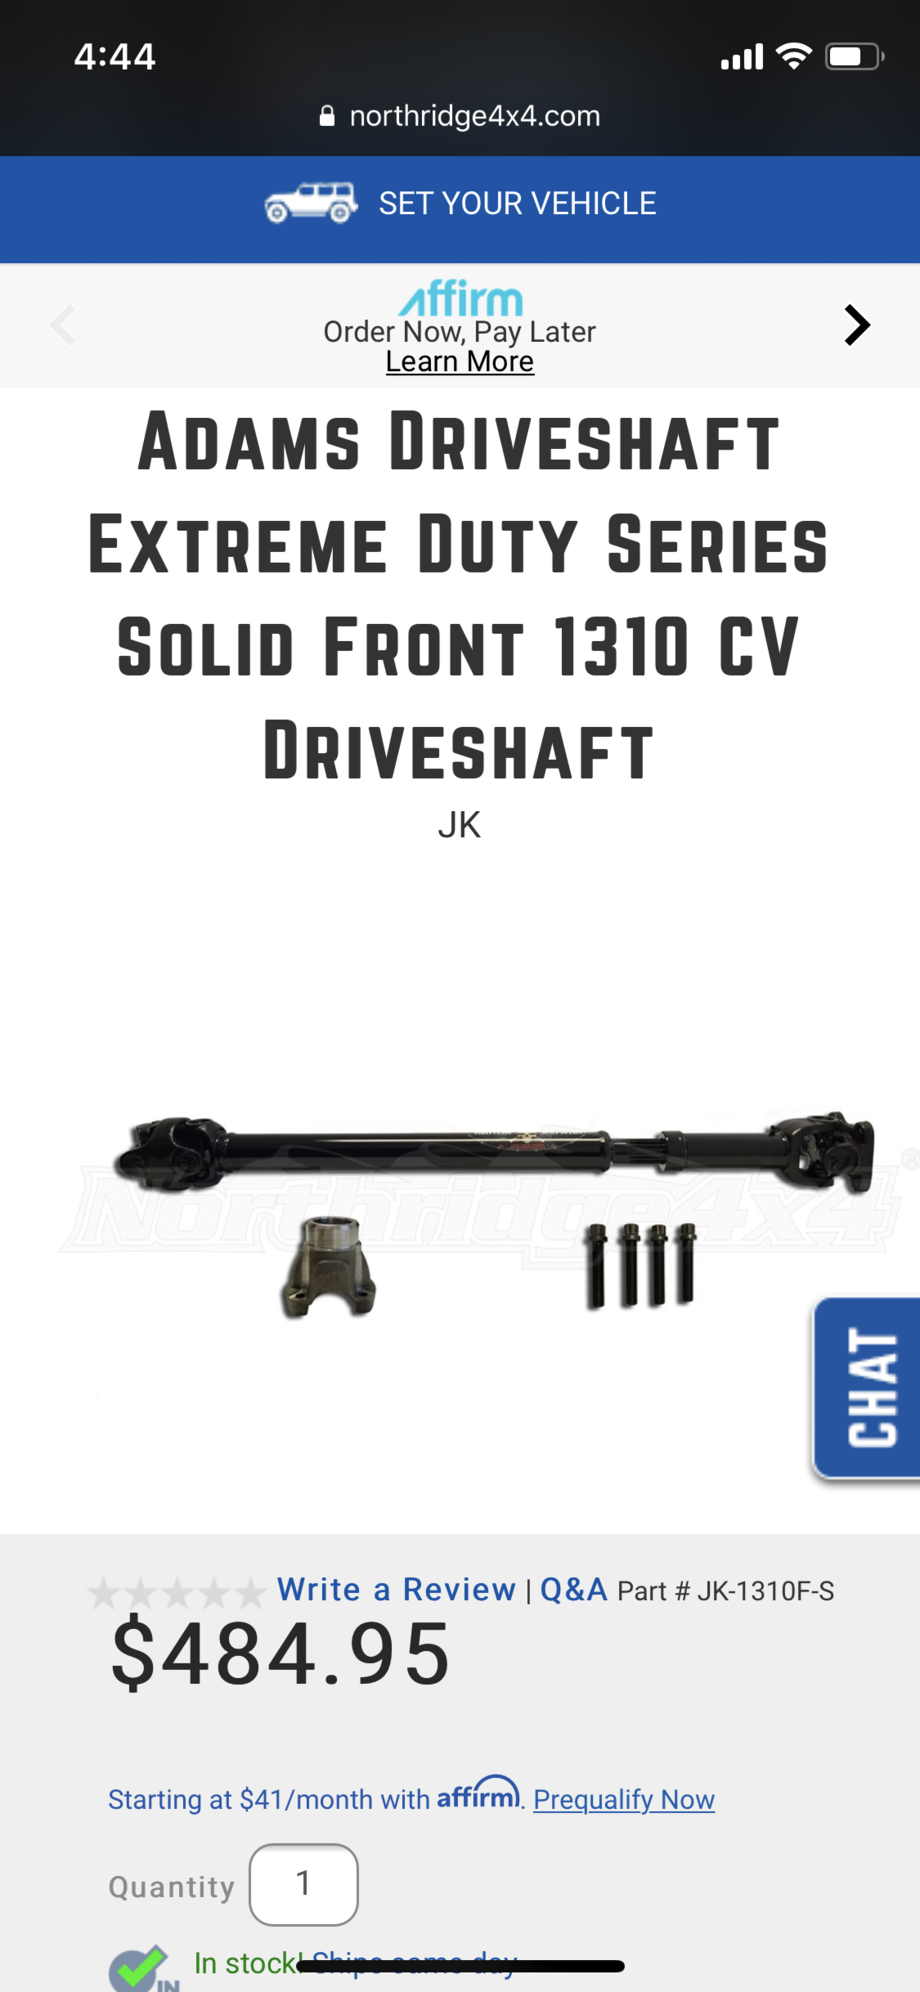 Drivetrain - Adams Driveshaft Extreme Duty Series Solid Front 1310 CV Driveshaft - New - 2007 to 2017 Jeep Wrangler - Forest Grove, OR 97116, United States